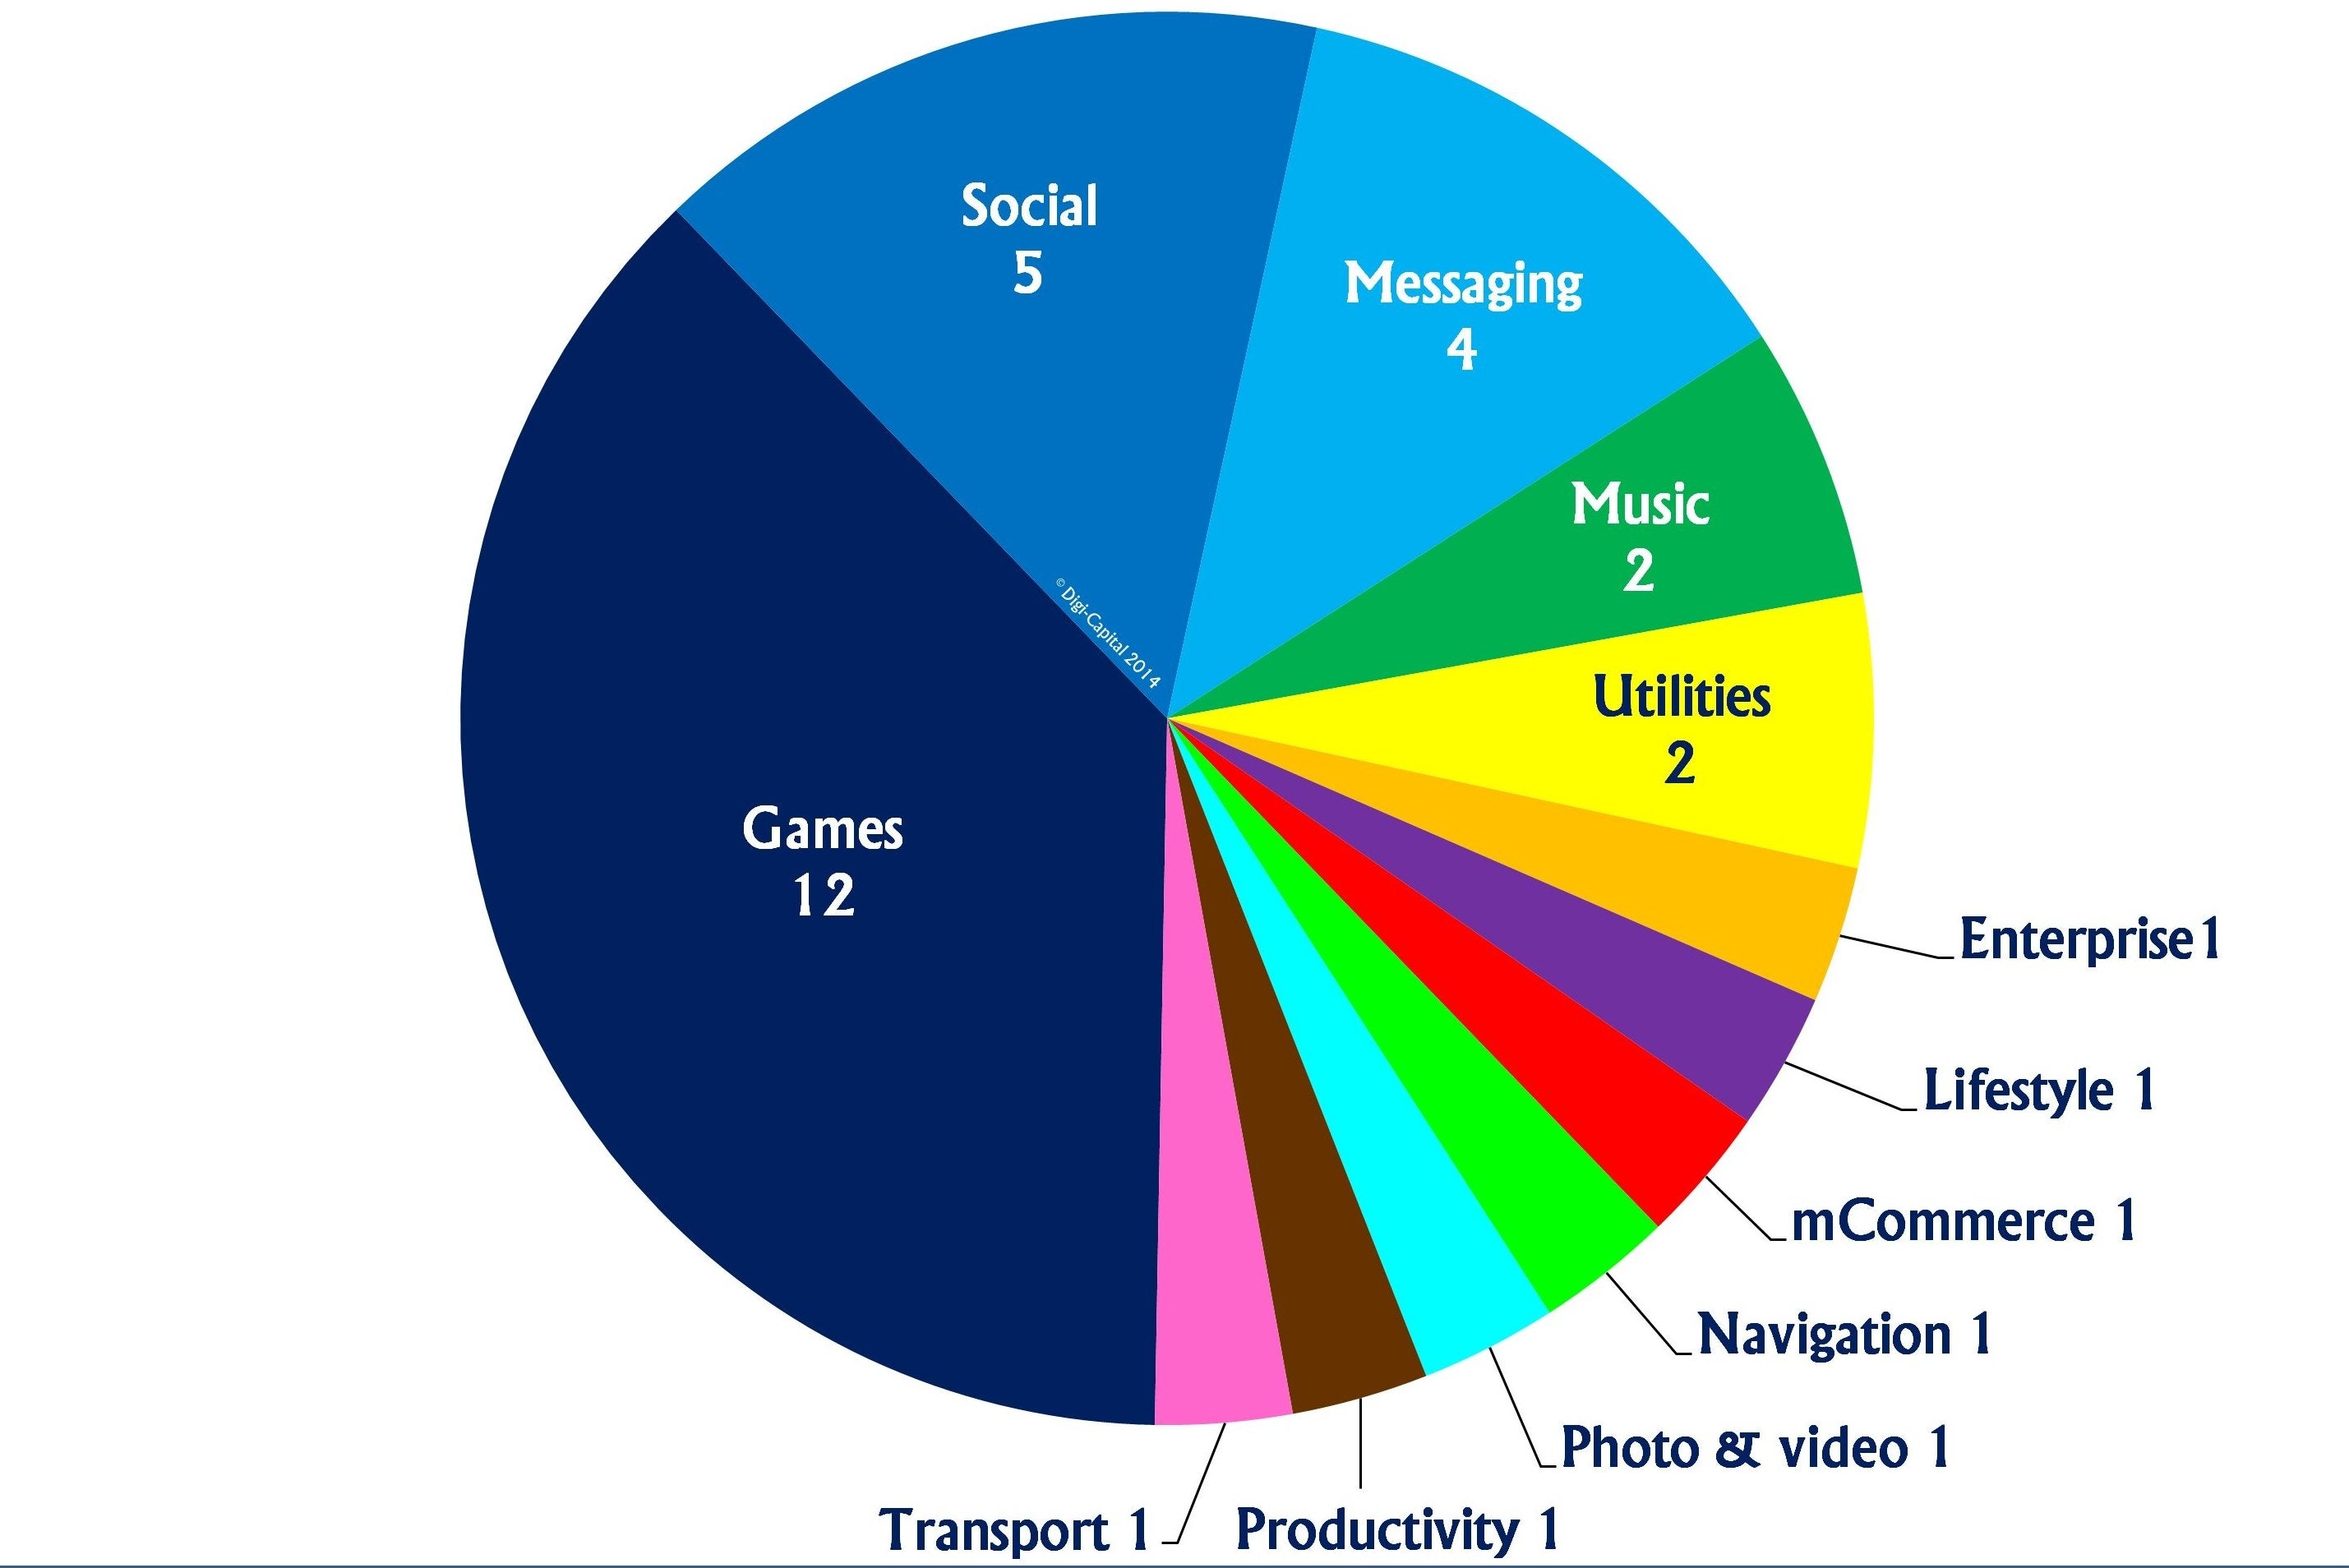 Image for Games dominate mobile internet business 'rich list'